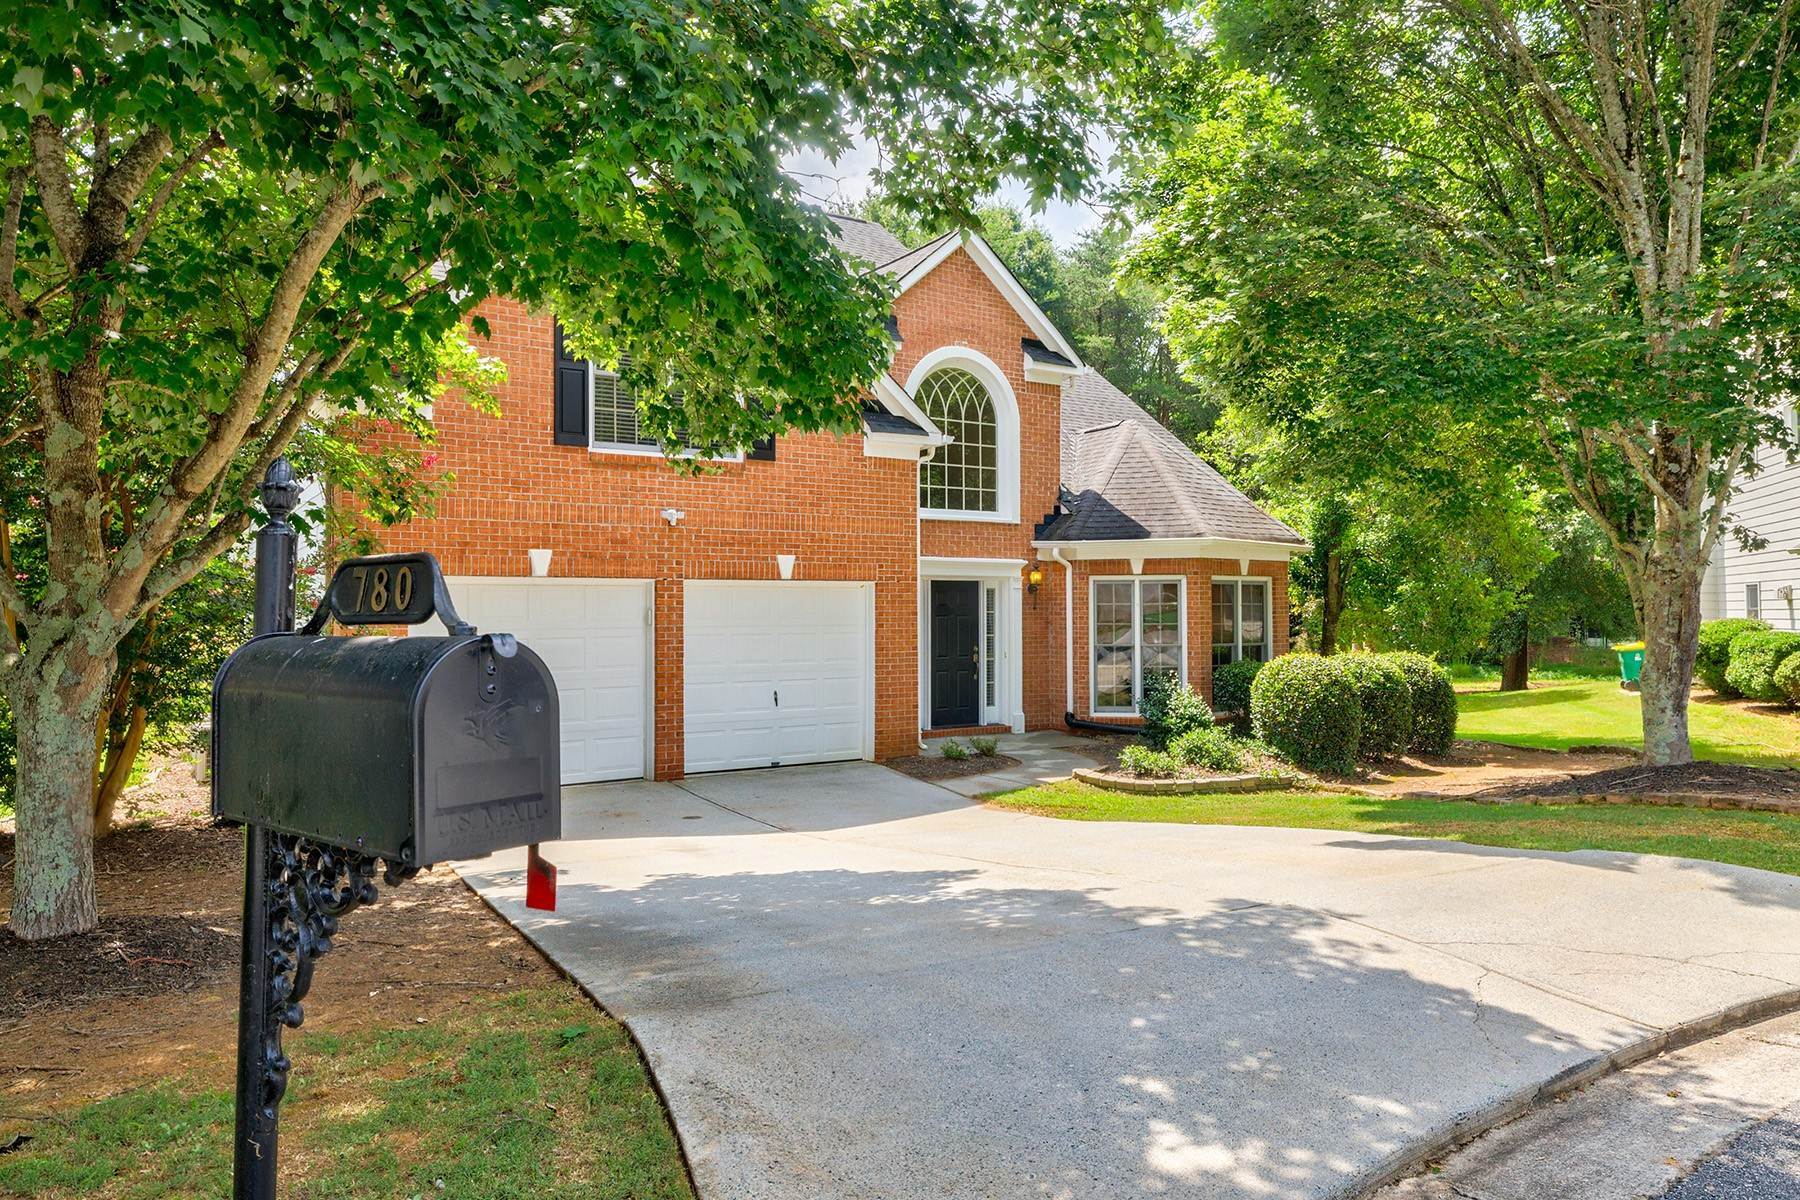 Single Family Homes for Sale at Excellent Invest Opportunity Residential Income 780 Treadstone Court Suwanee, Georgia 30024 United States